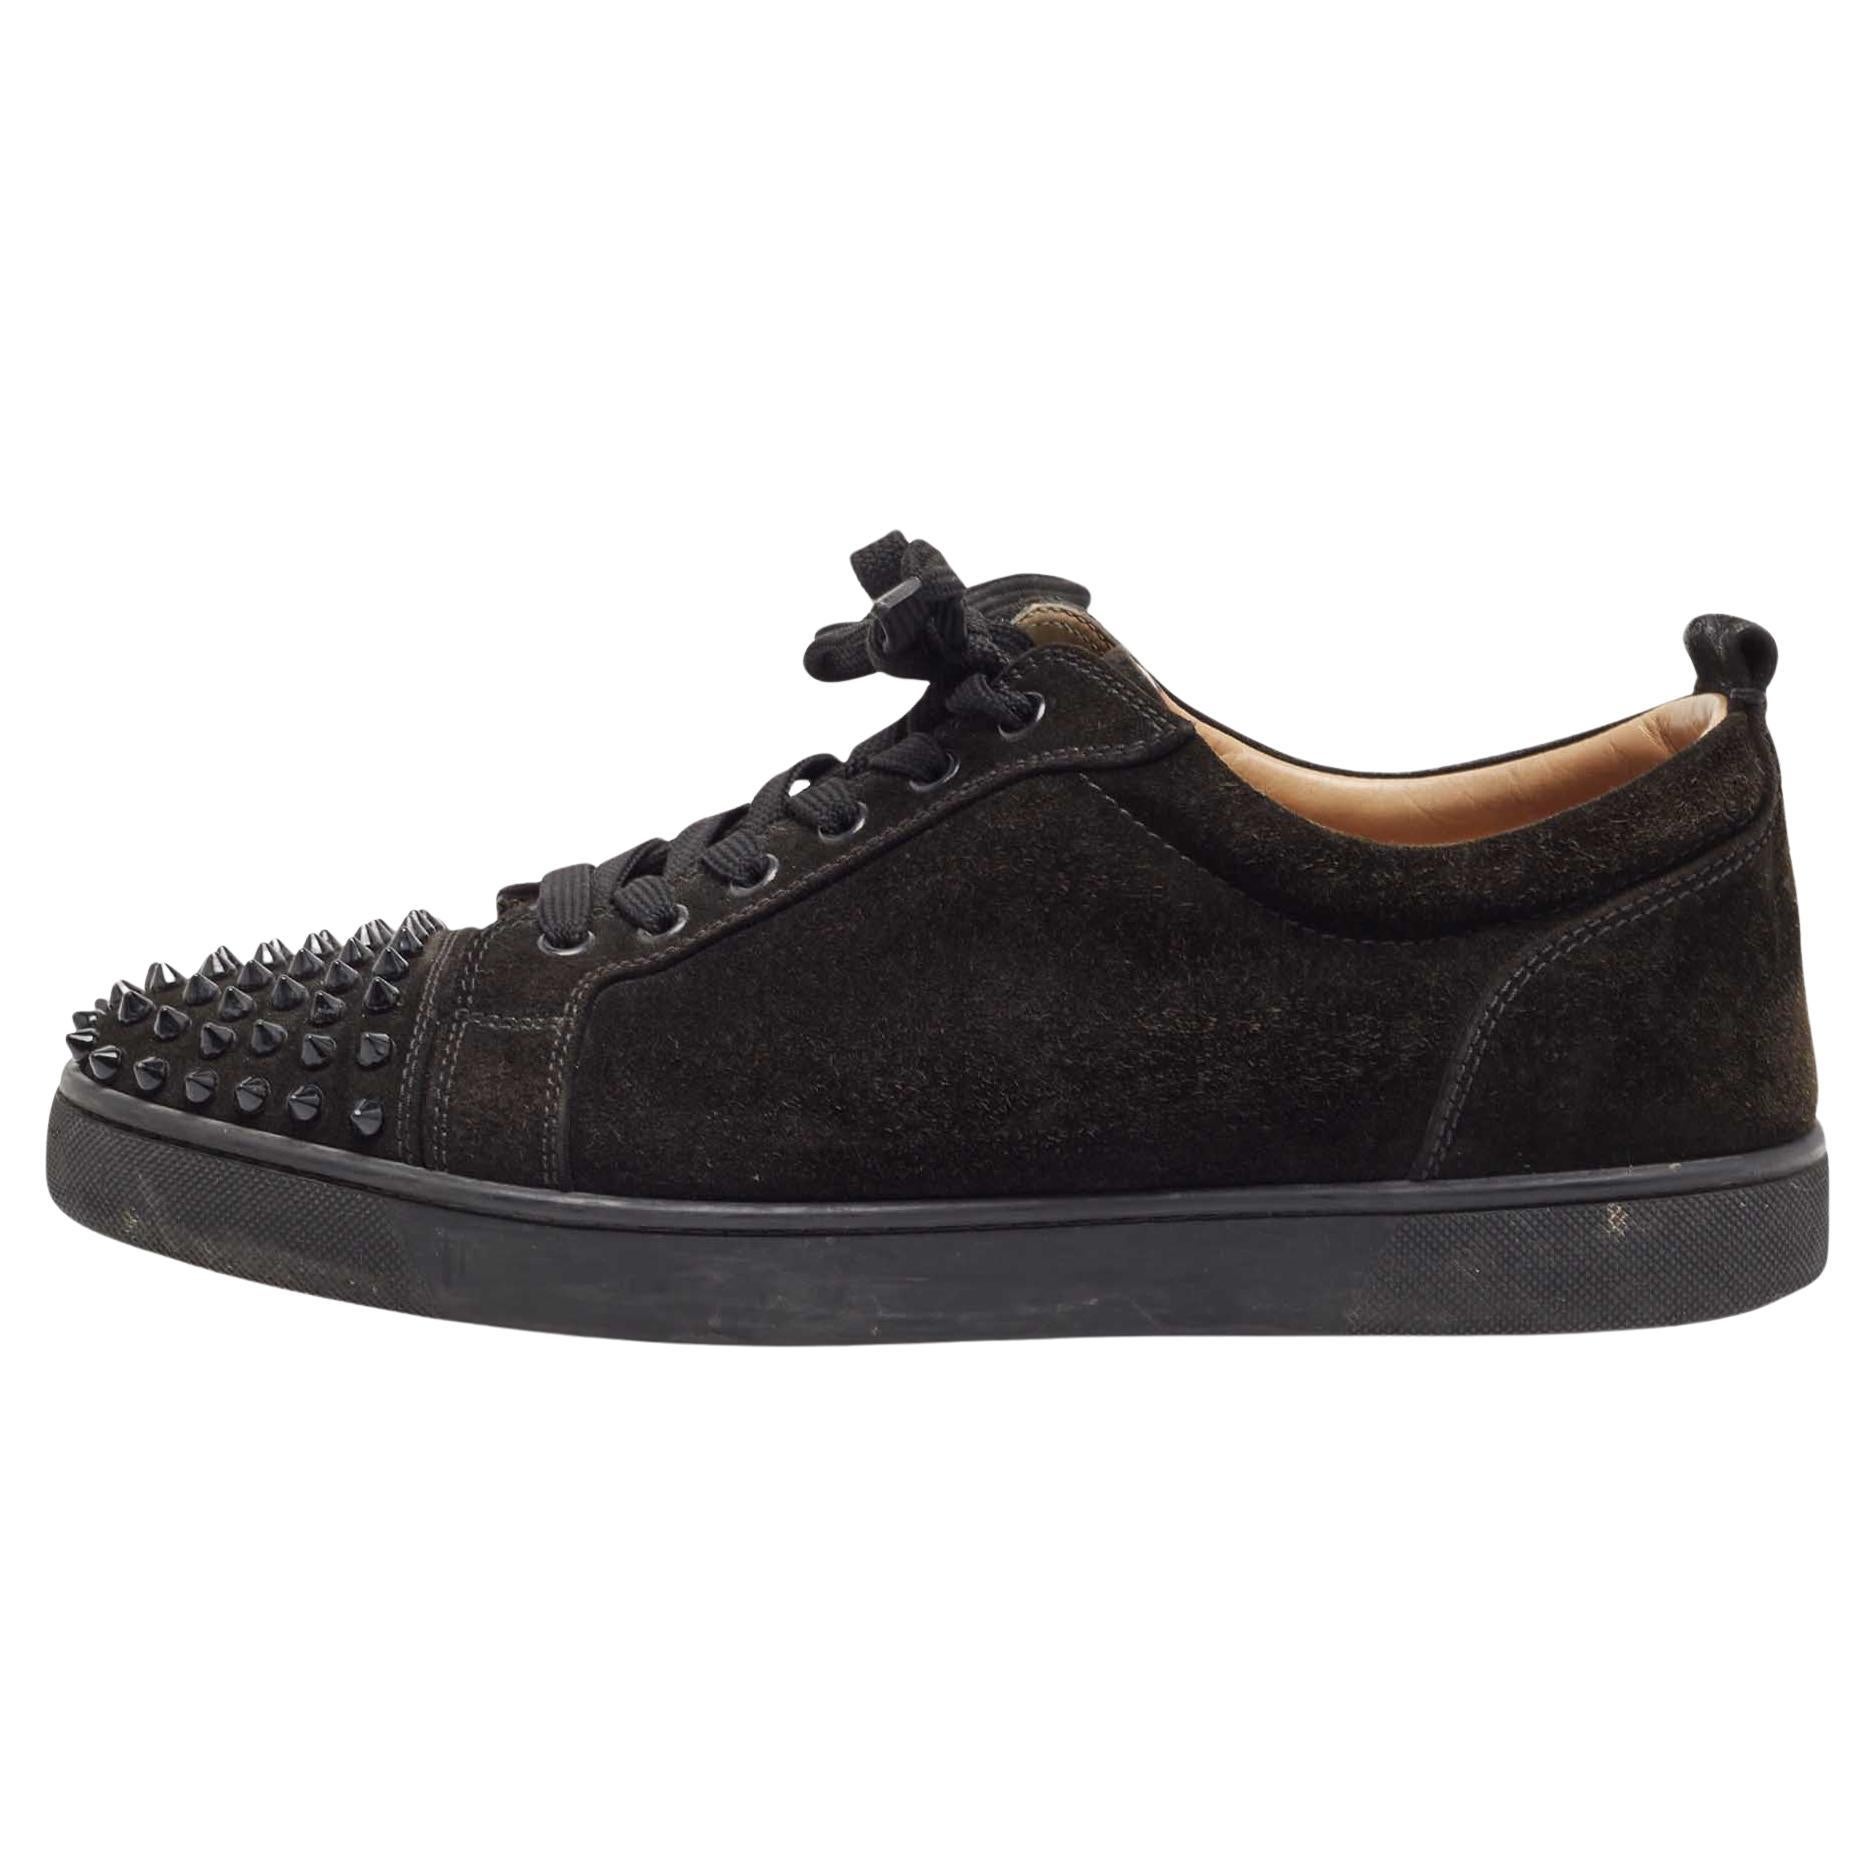 Christian Louboutin Black Suede Louis Junior Spike Low Top Sneakers Size 43.5